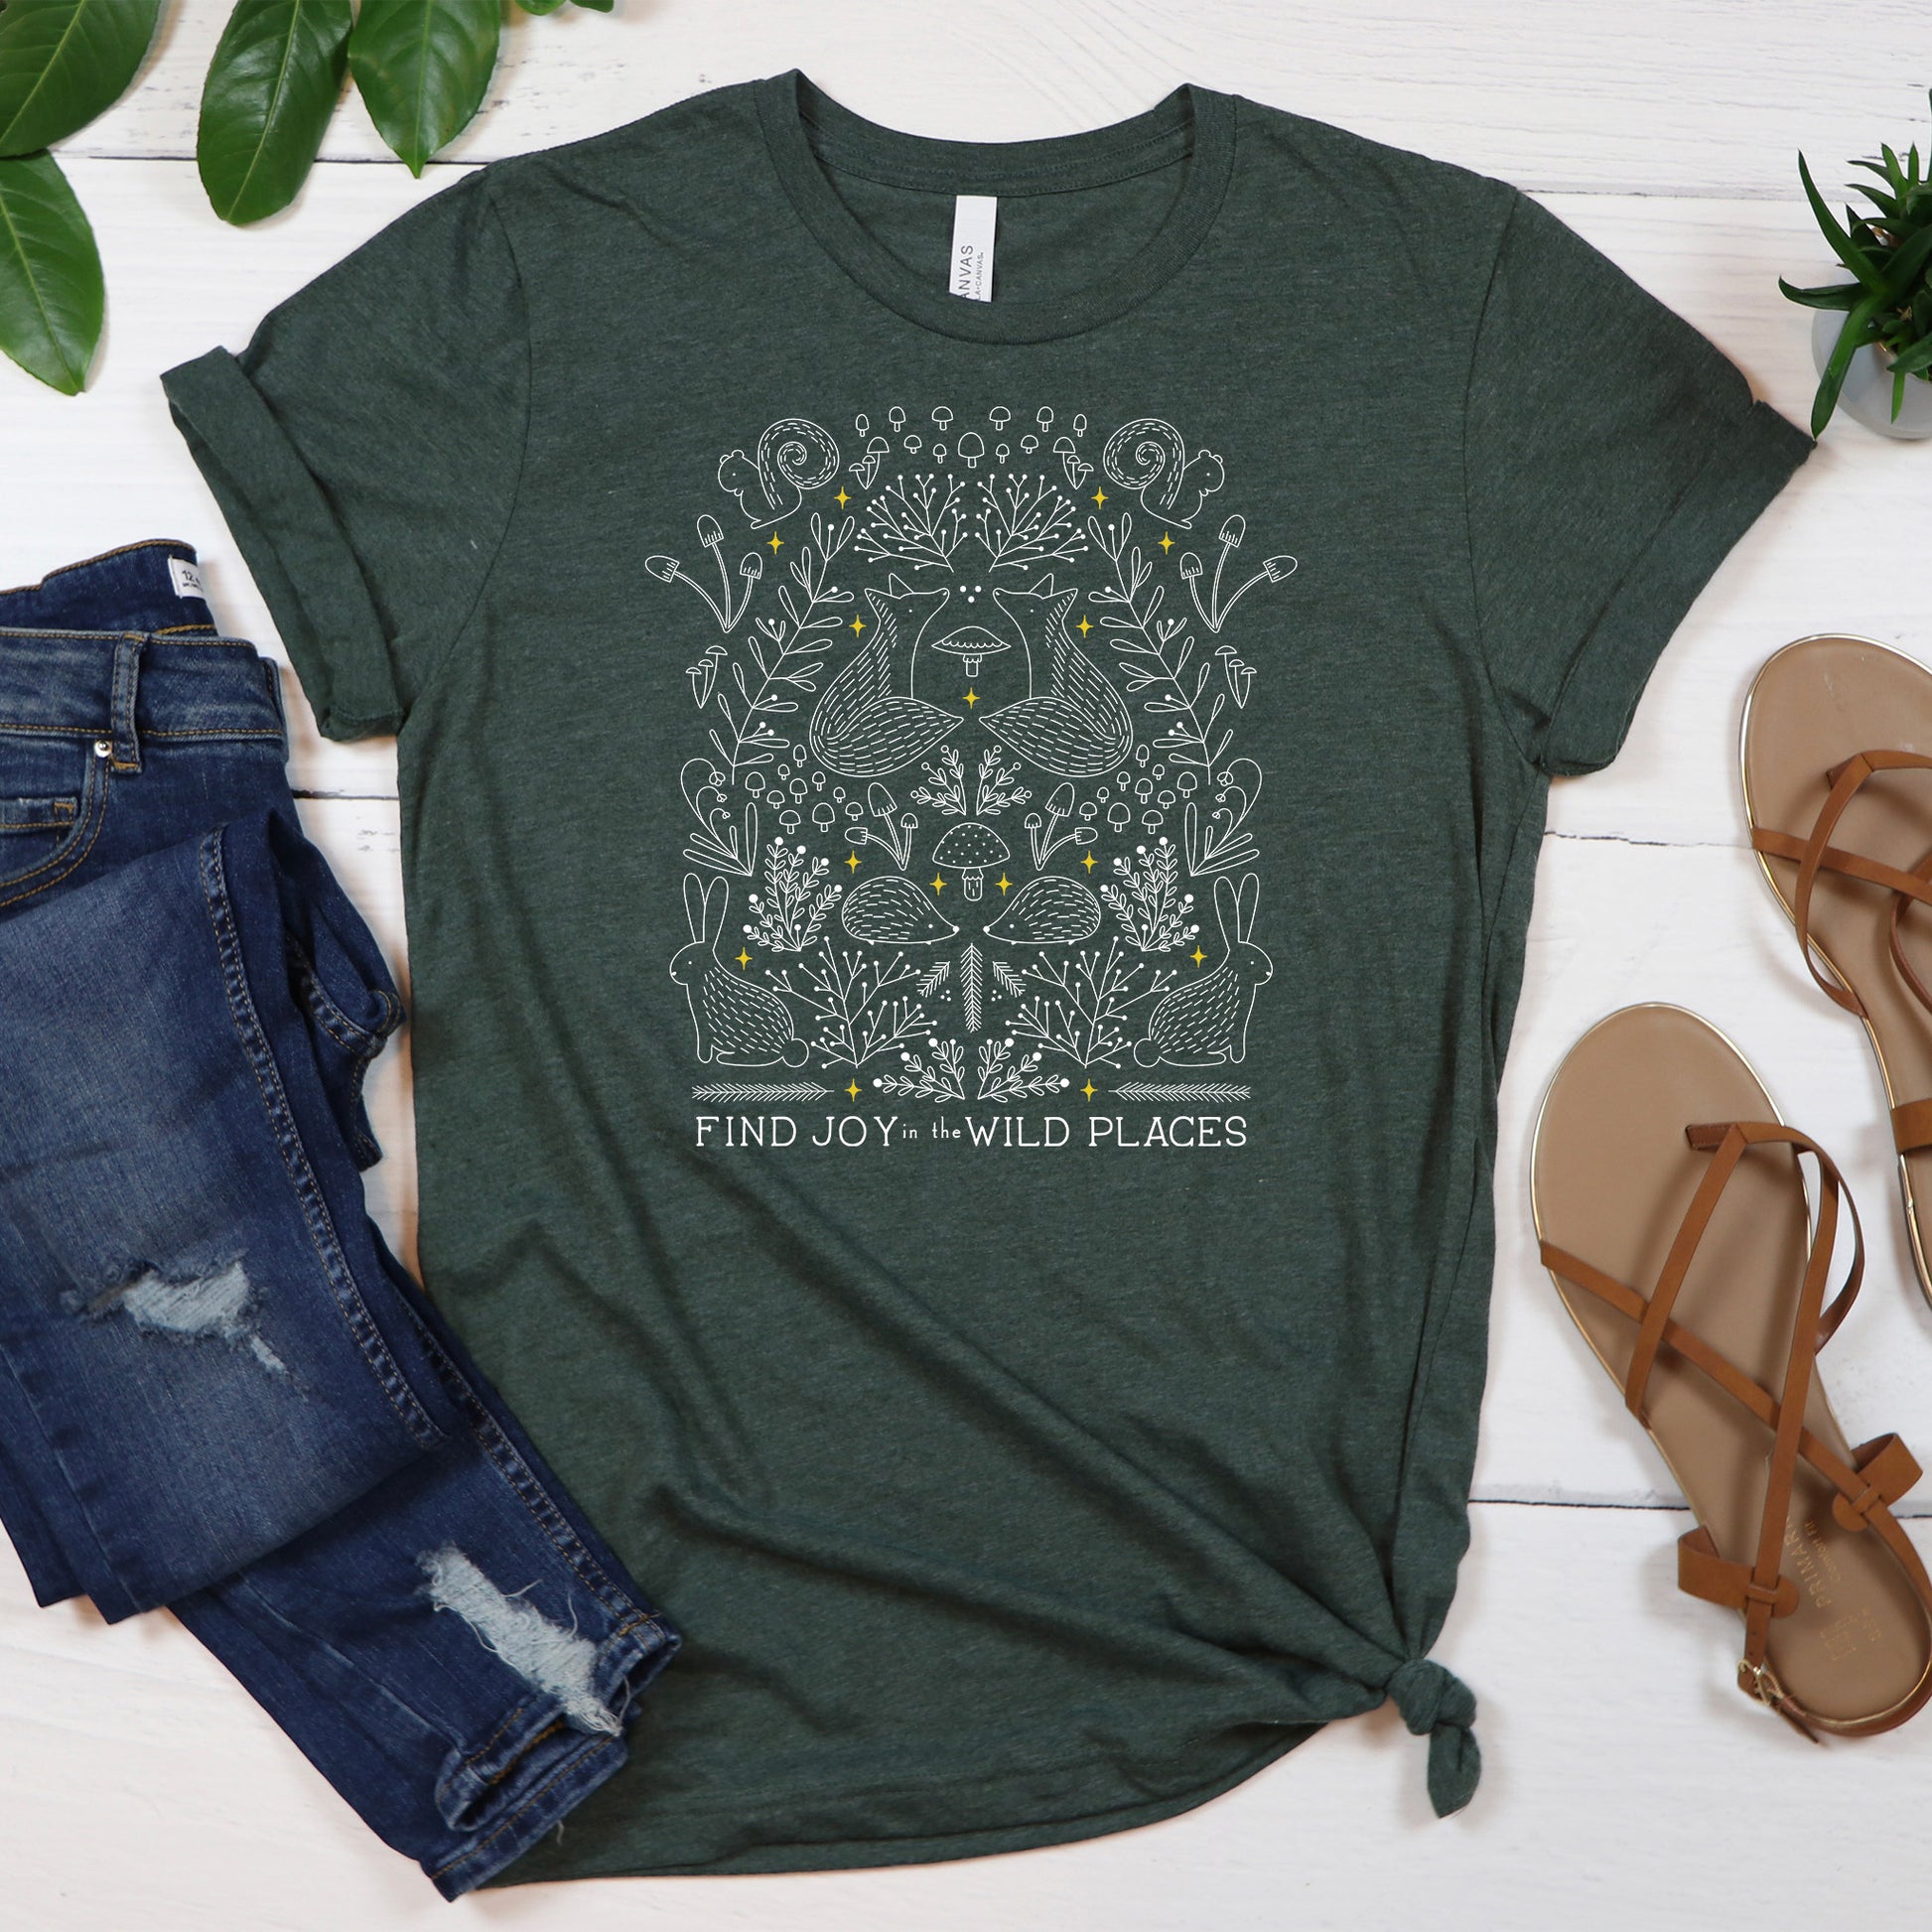 heather green t-shirt with the text 'find joy in the wild places' design features intricate foxes, hedgehogs, rabbit, plants and mushrooms.